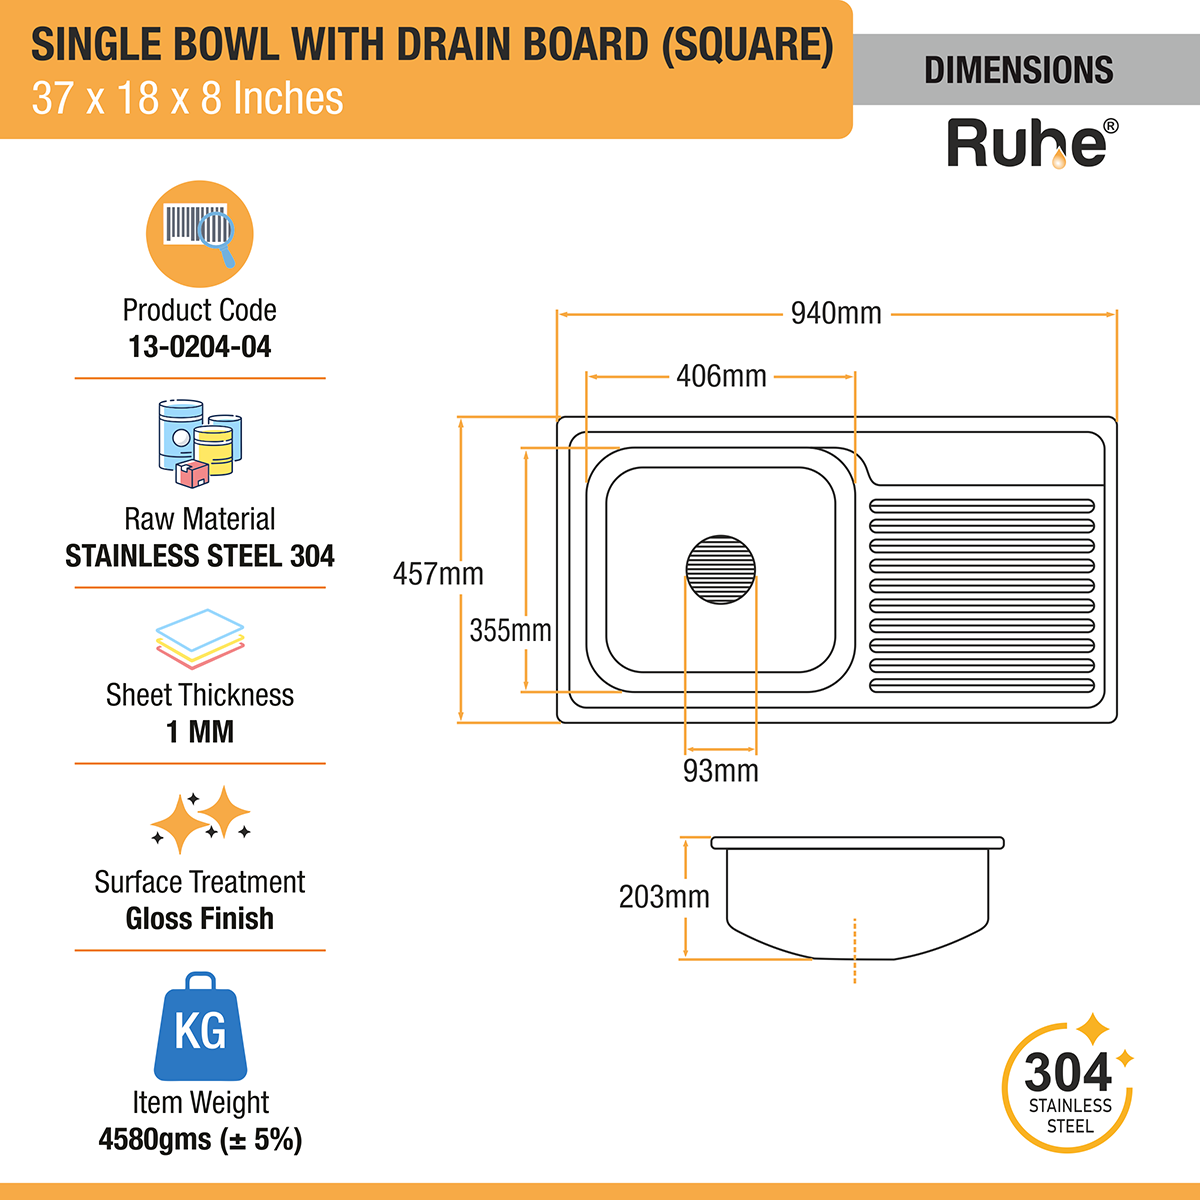 Square Single Bowl (37 x 18 x 8 Inches) 304-Grade Stainless Steel Kitchen Sink with Drainboard dimensions and sizes